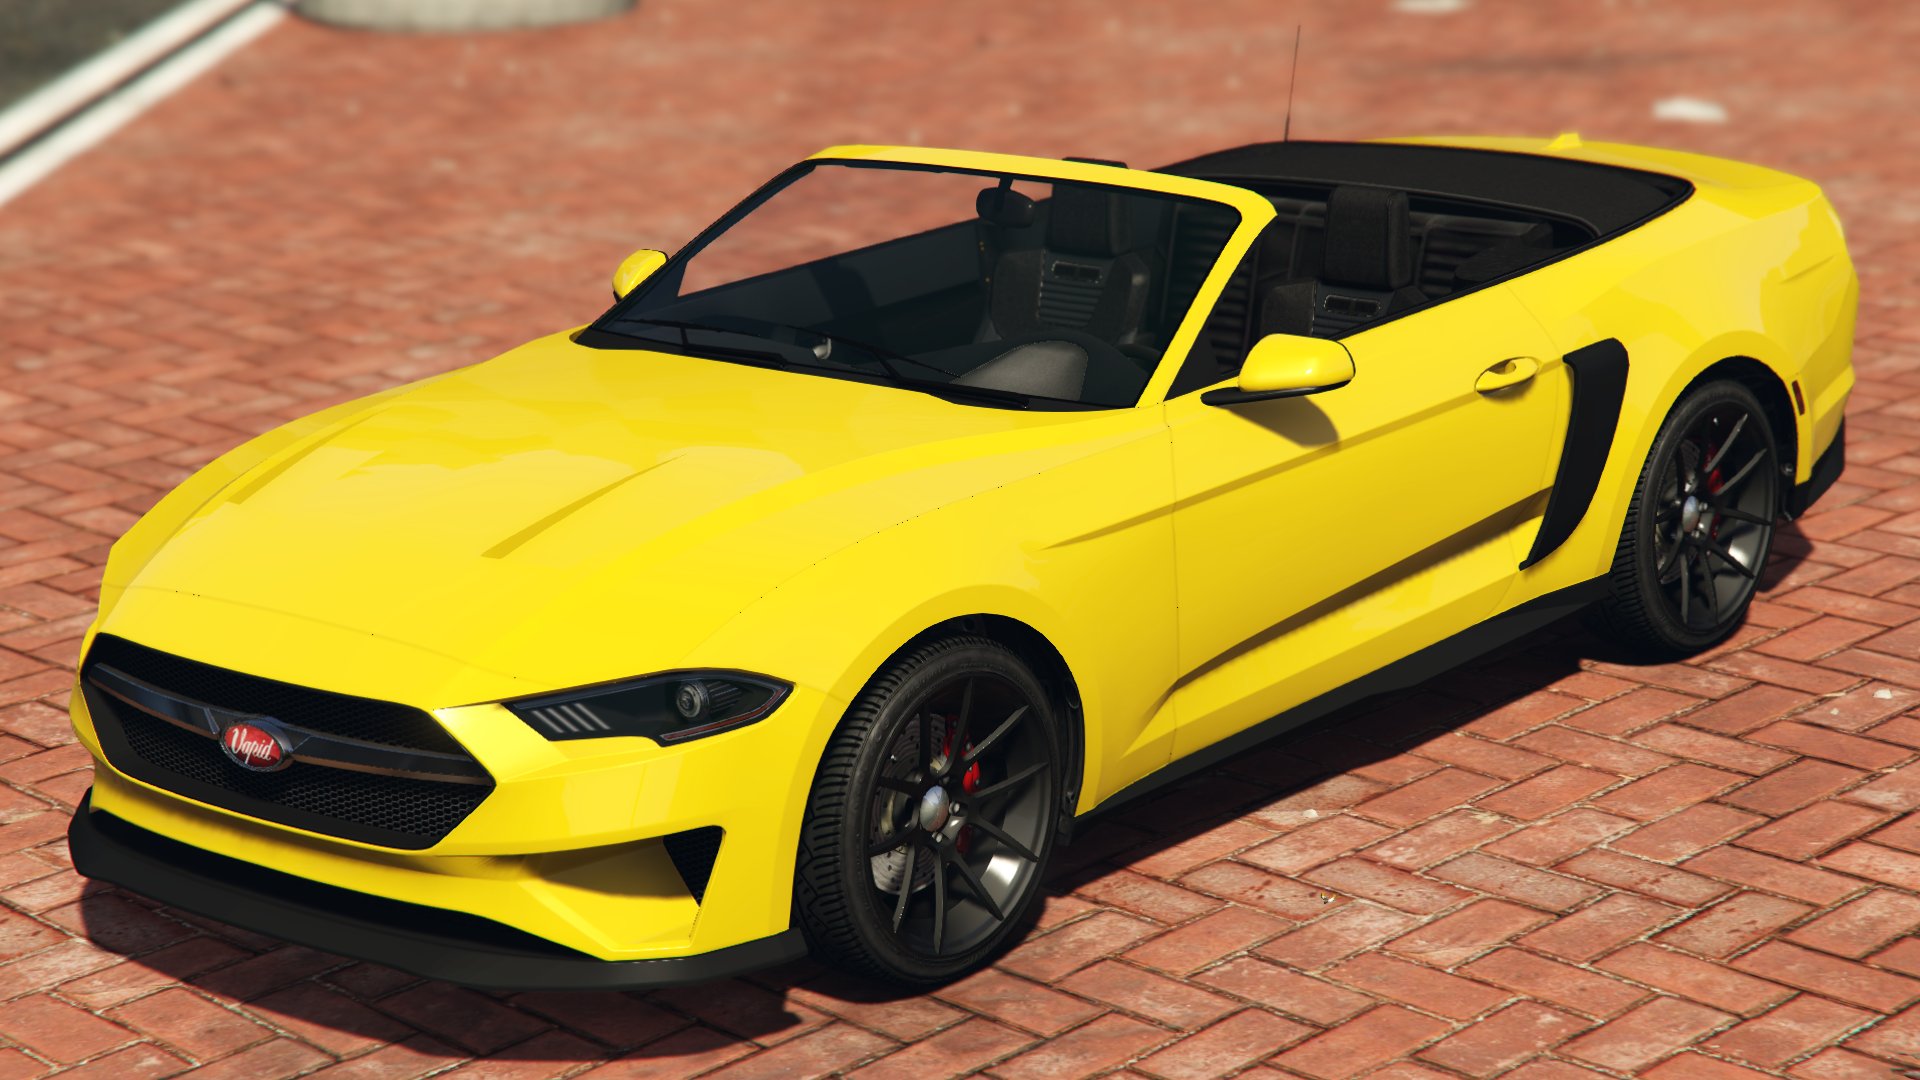 https://static.wikia.nocookie.net/gtawiki/images/f/f3/DominatorGT-GTAOe-front-RoofDown.png/revision/latest?cb=20231214201003